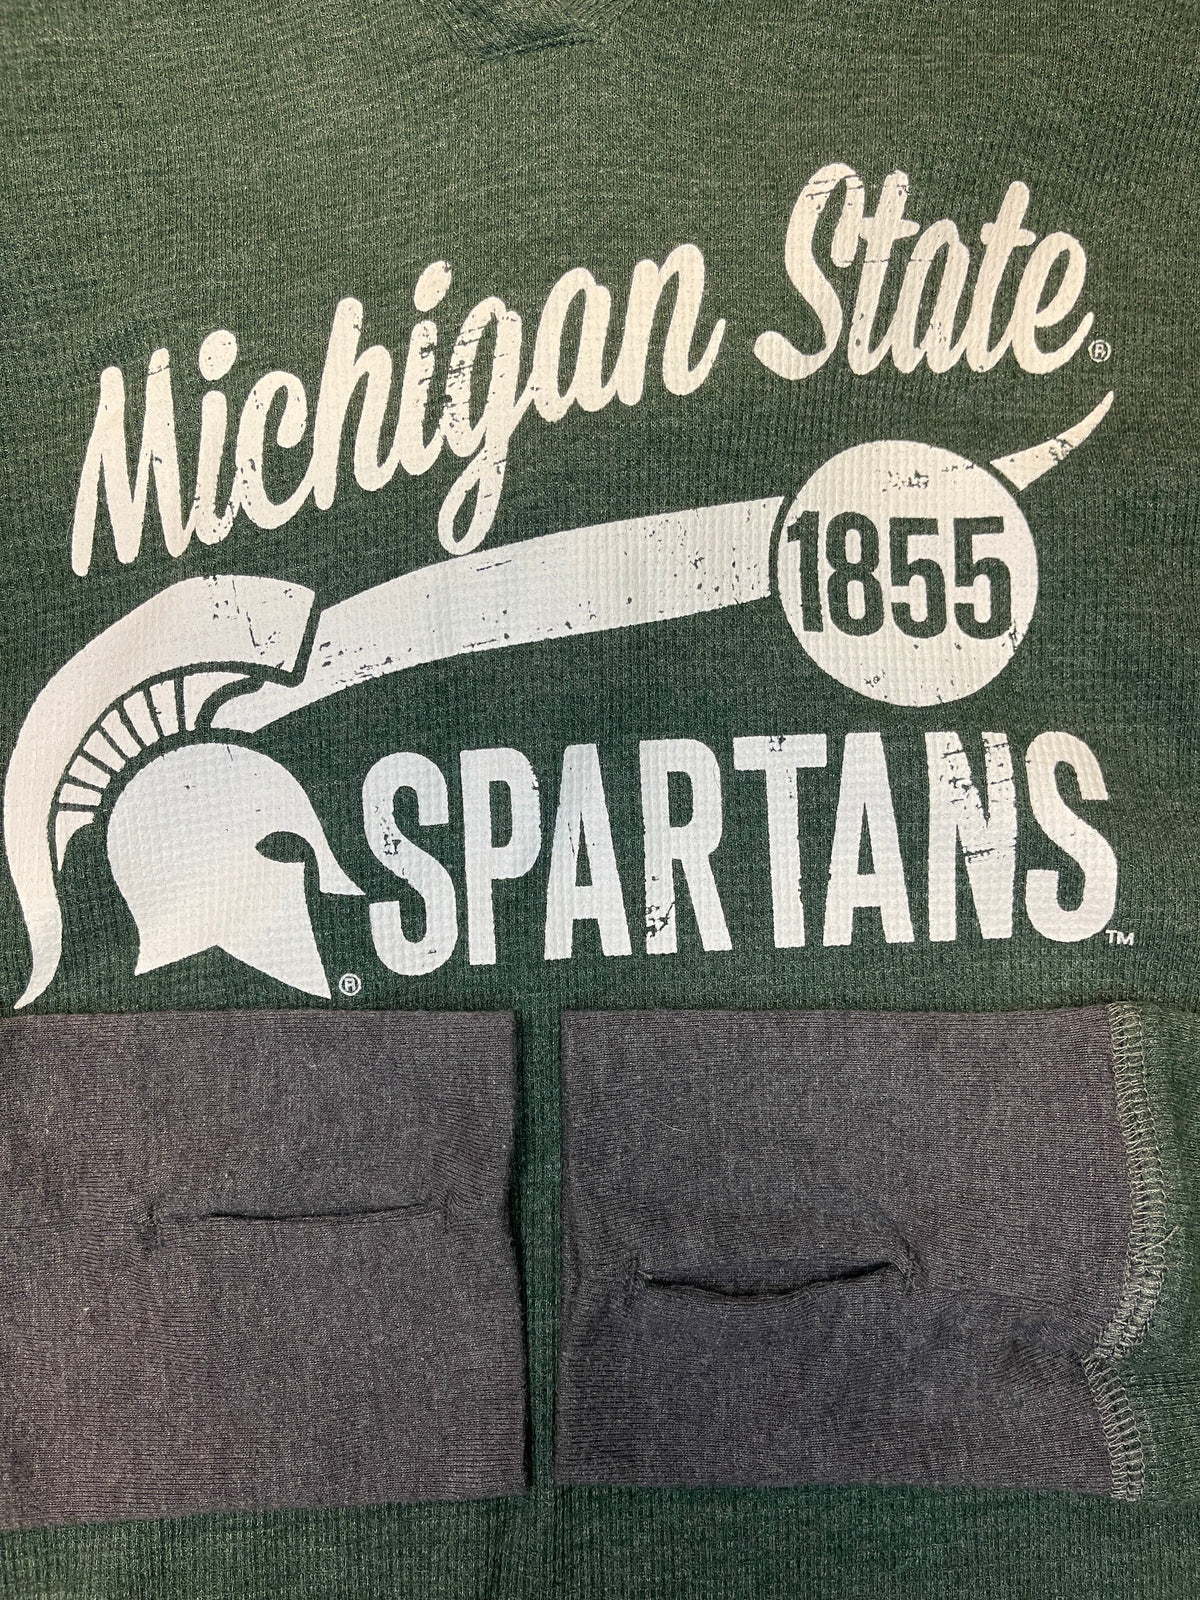 NCAA Michigan State Spartans Waffle Girls' Pullover Hoodie Youth X-Large 16-18